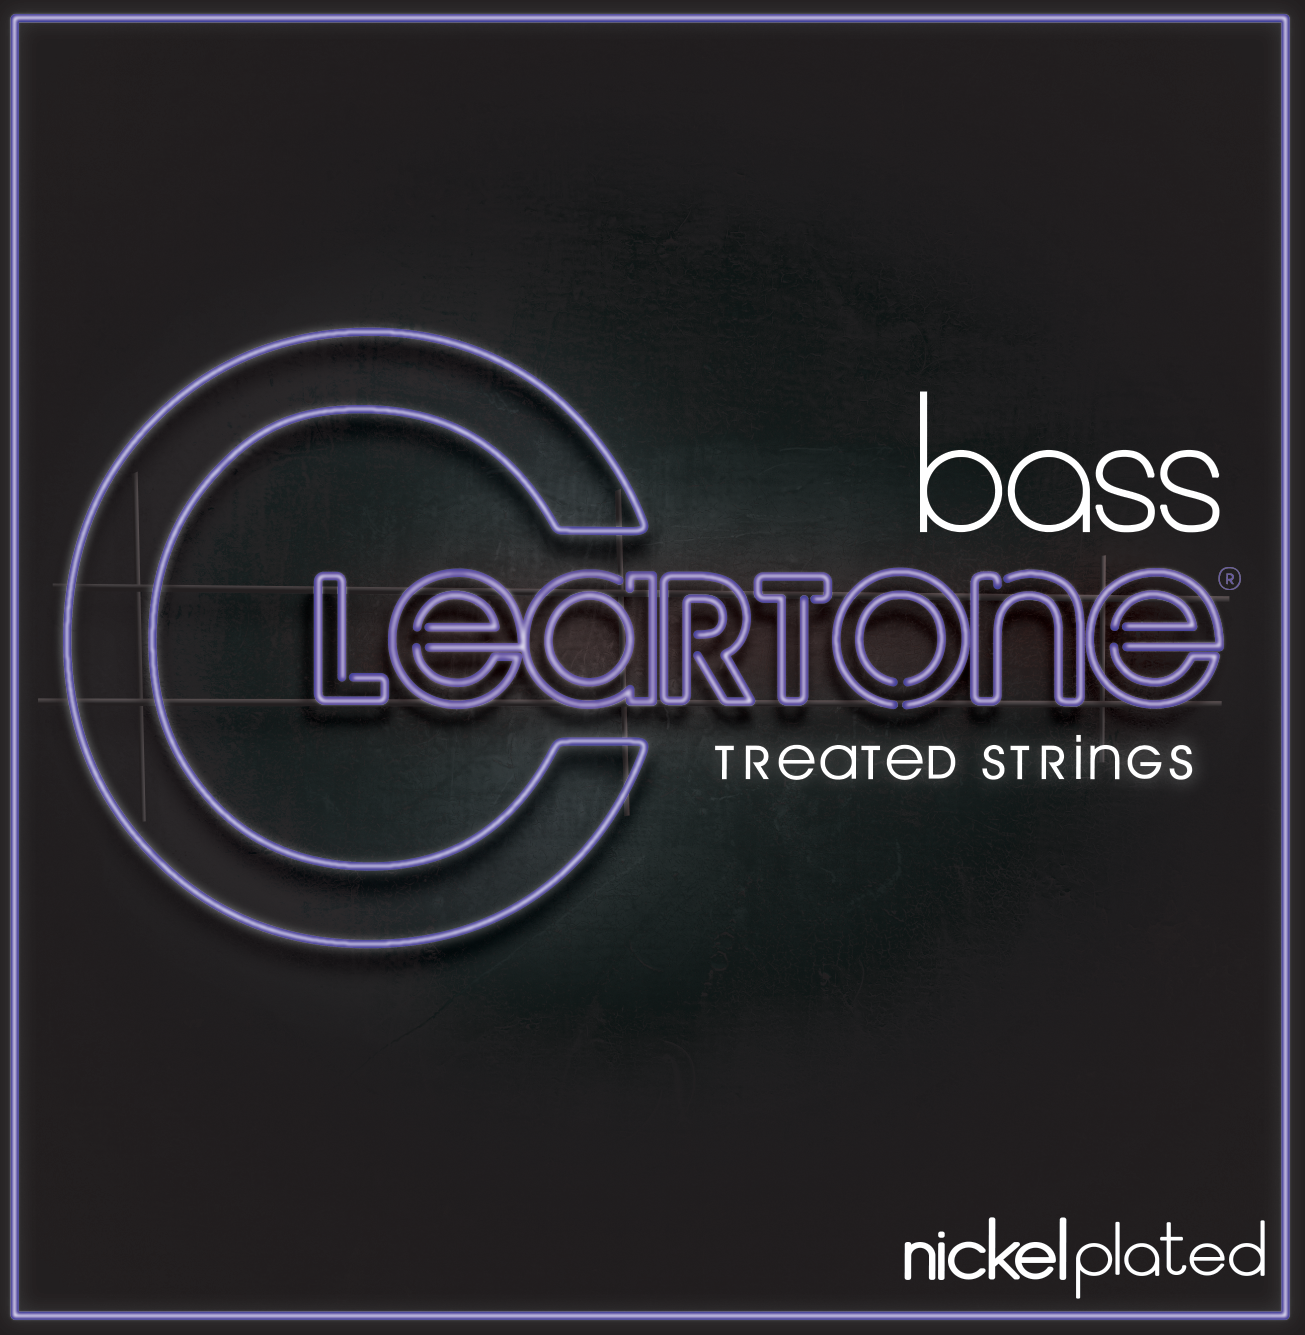 Cleartone Electric Bass Strings